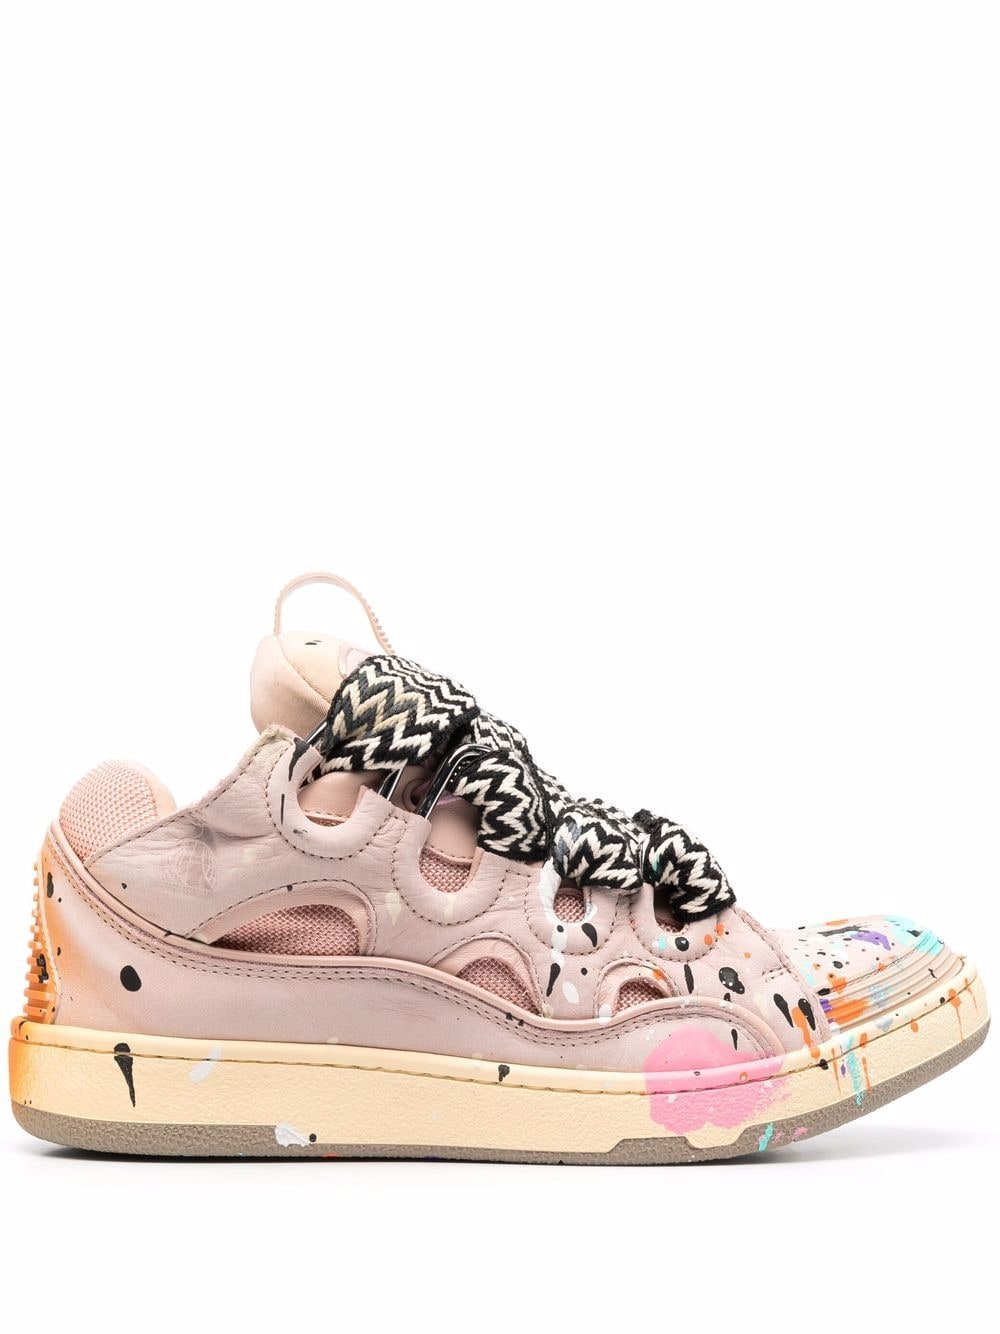 LANVIN X GALLERY DEPT. Leather Curb Sneakers Pink